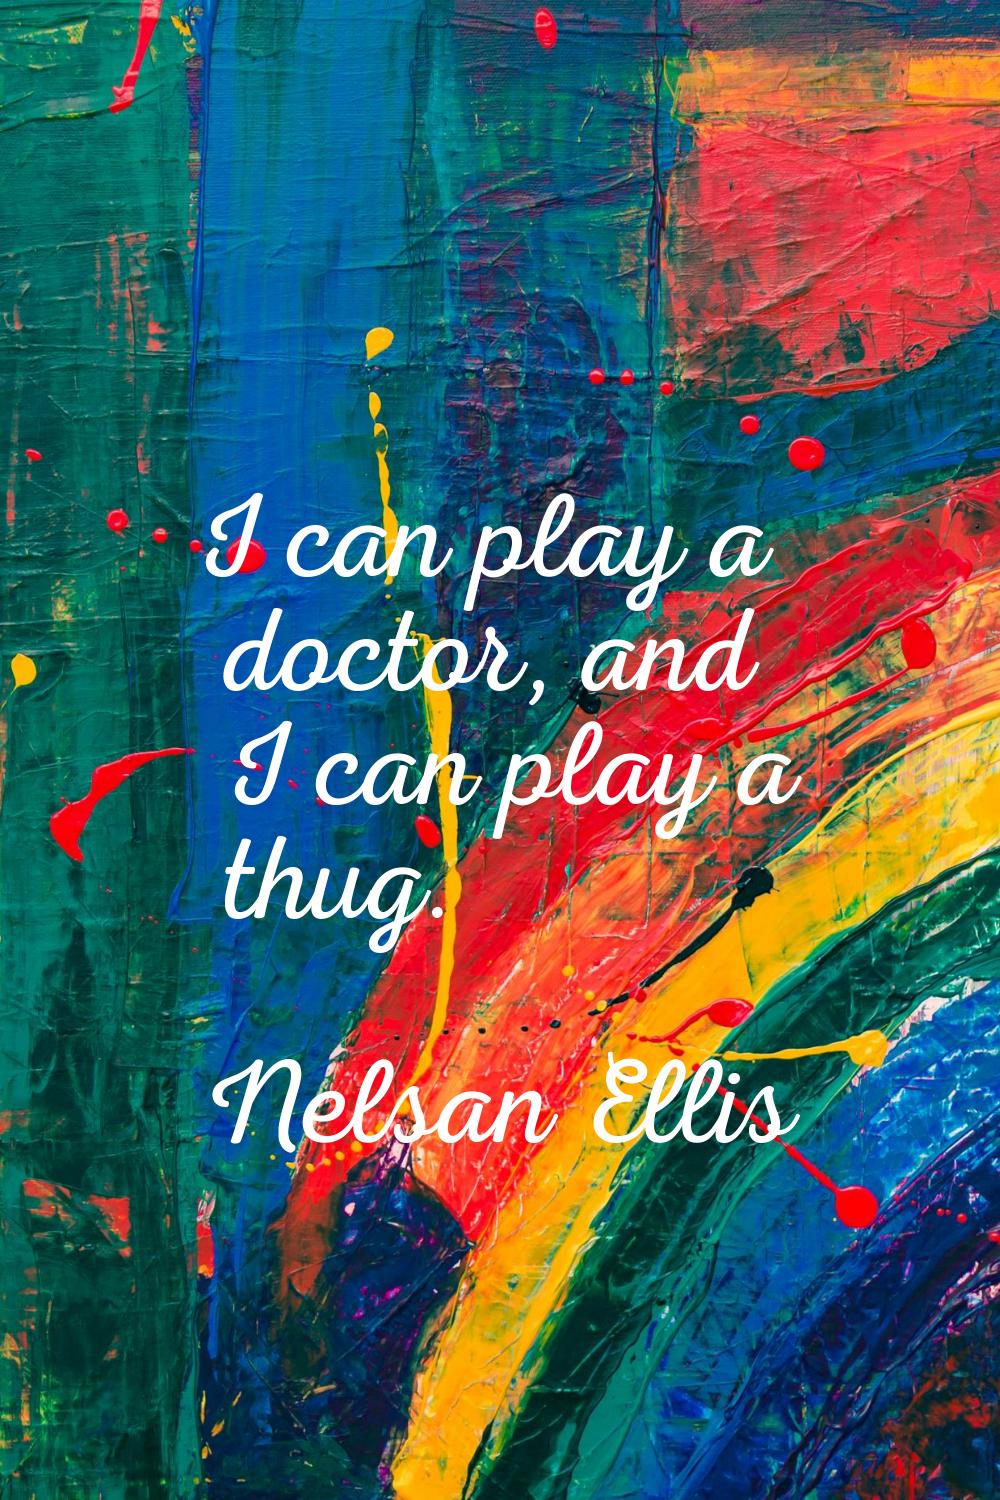 I can play a doctor, and I can play a thug.